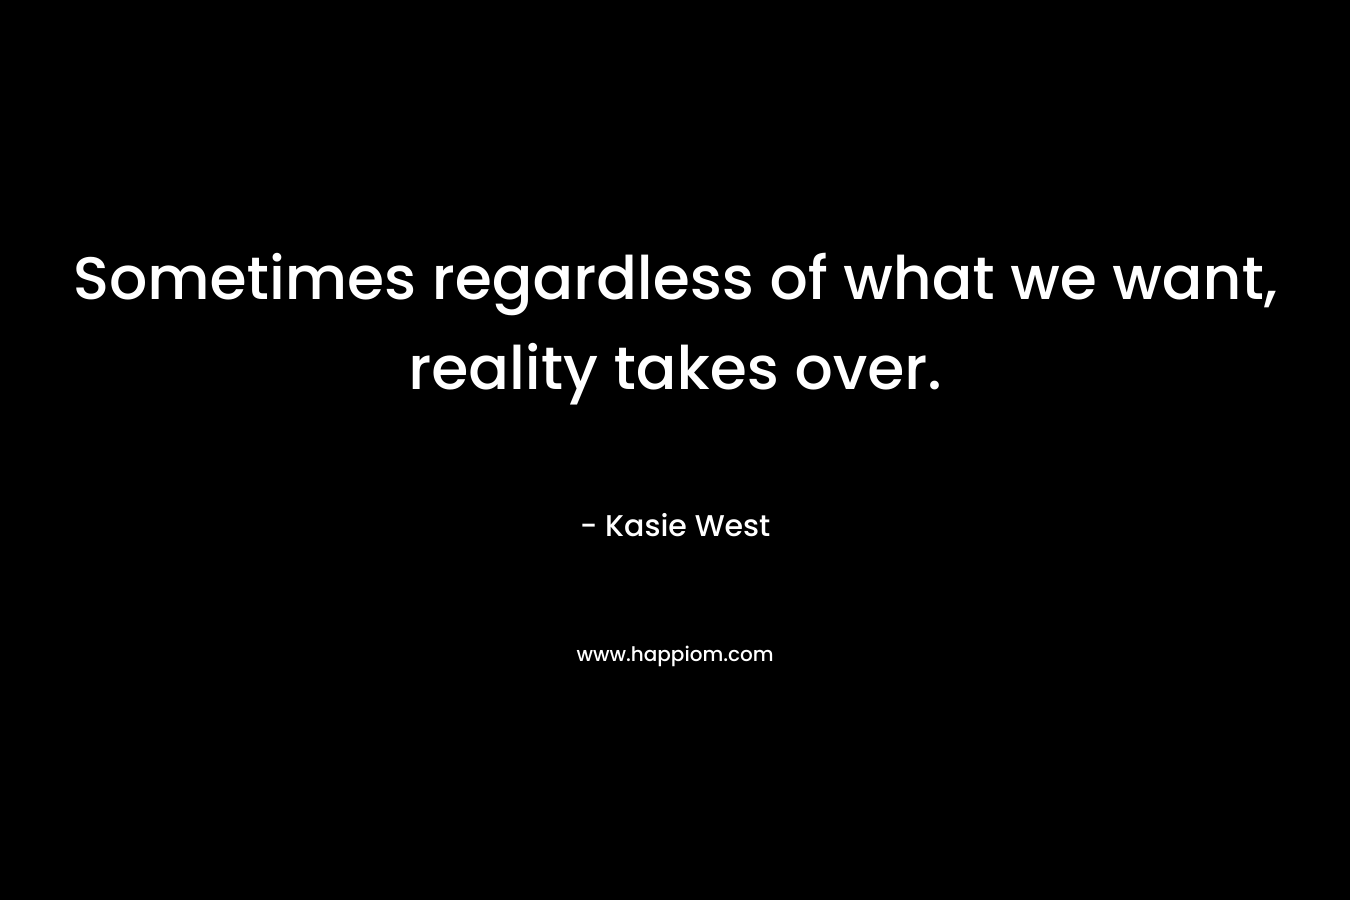 Sometimes regardless of what we want, reality takes over.